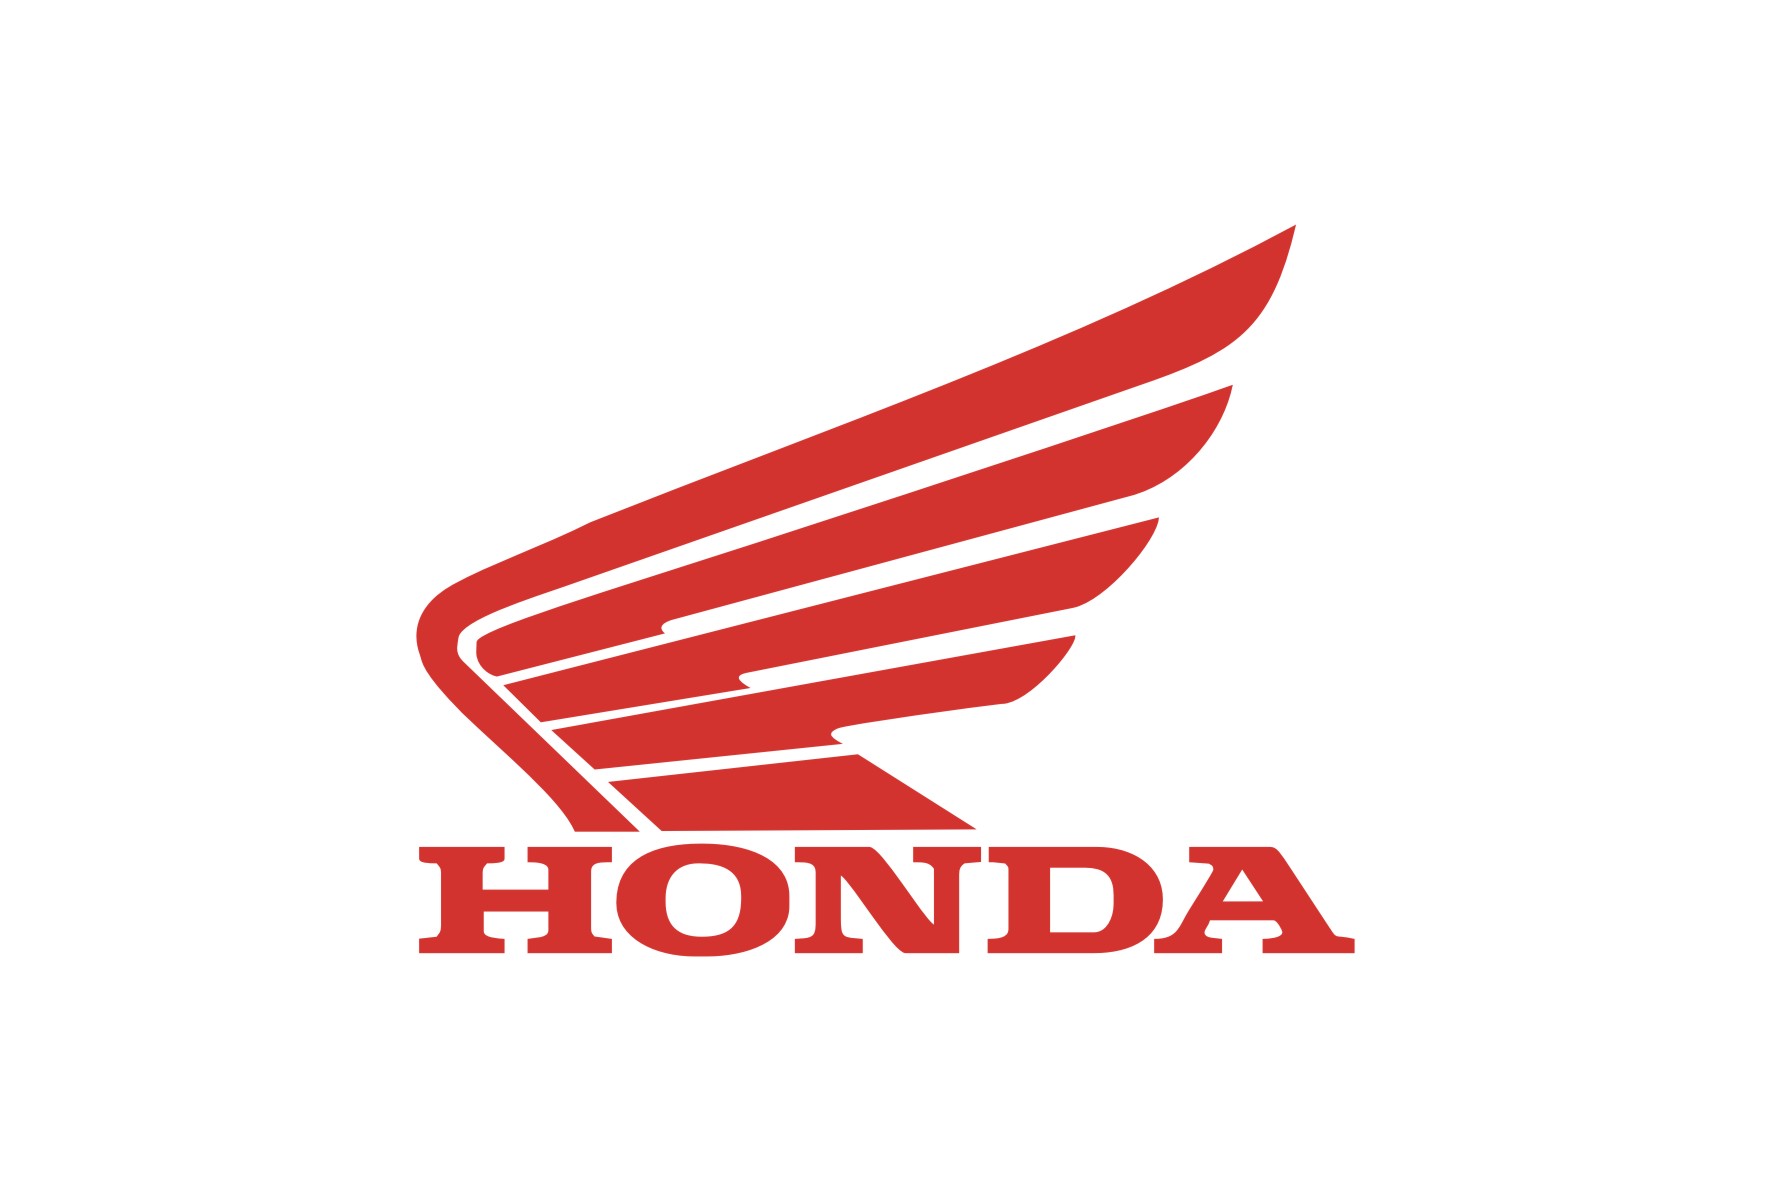 Download Free Honda Symbol Svg - 67+ SVG Images File for Cricut, Silhouette and Other Machine